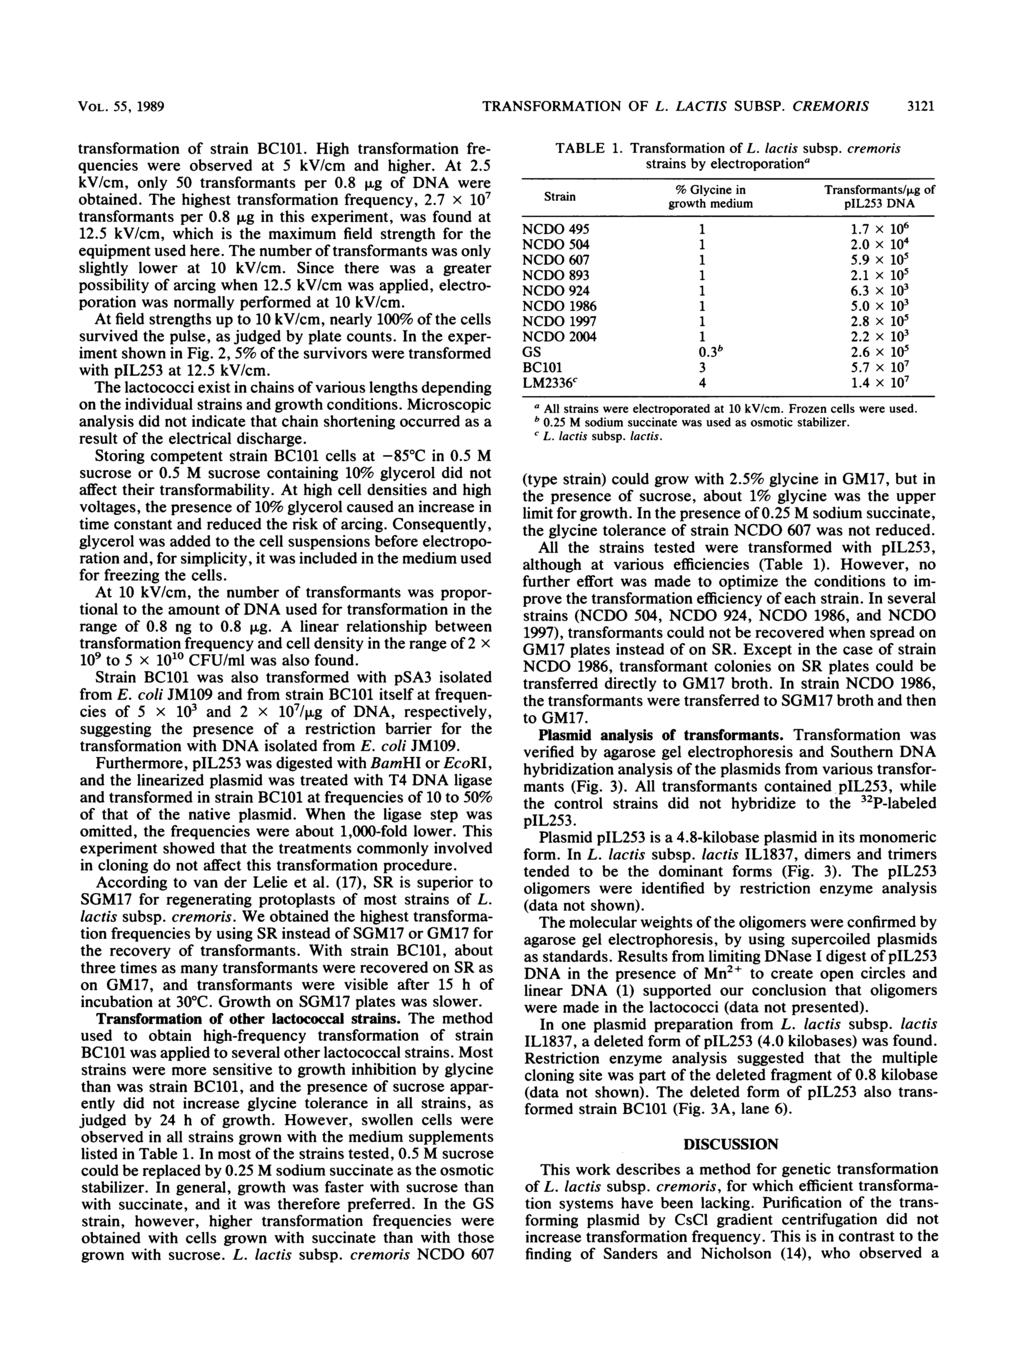 VOL. 55, 1989 TRANSFORMATION OF L. LACTIS SUBSP. CRMORIS 3121 transformation of strain BC11. High transformation frequencies were observed at 5 kv/cm and higher. At 2.